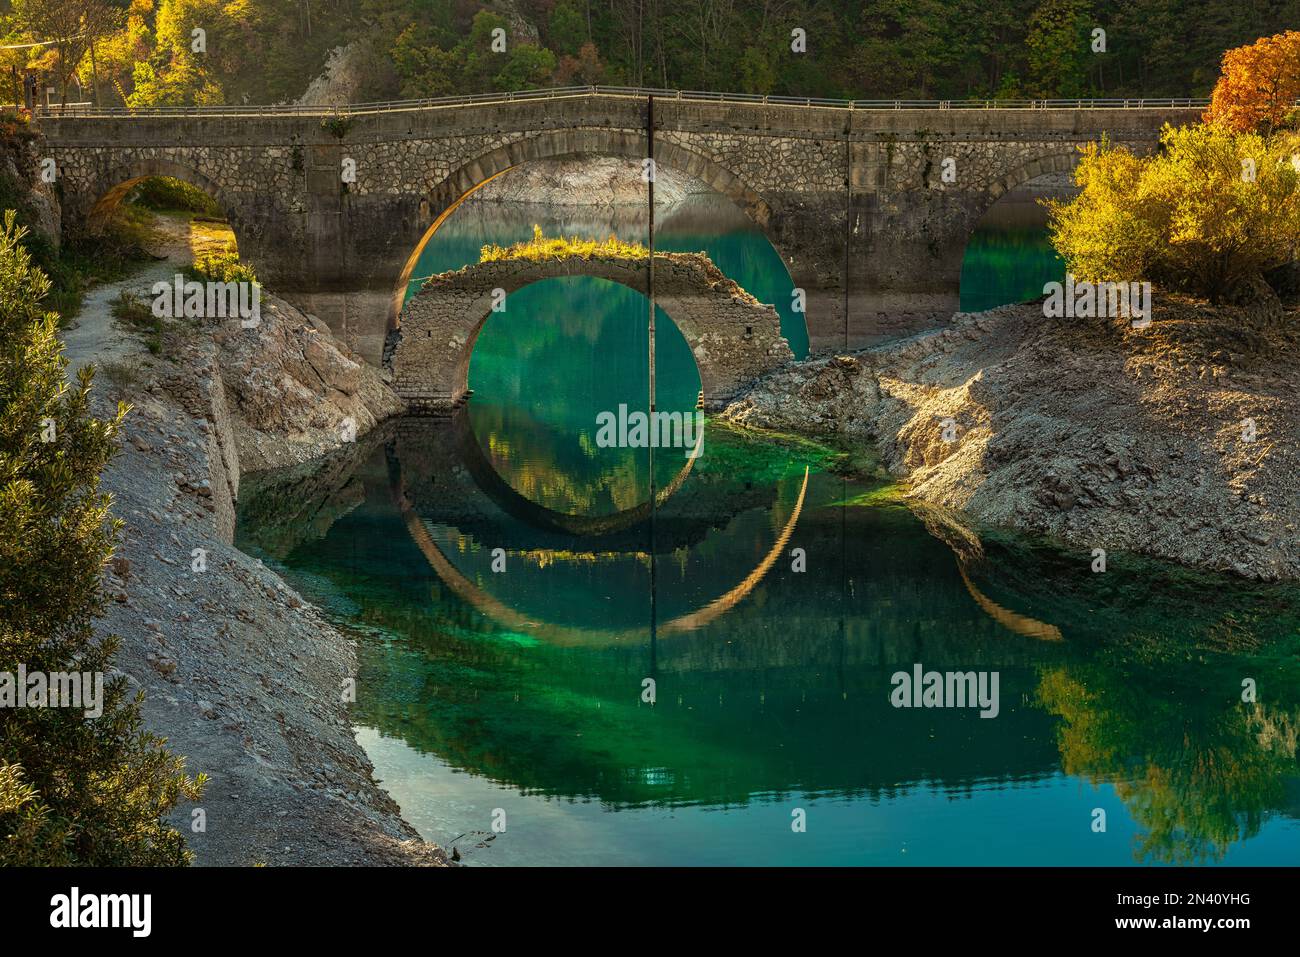 The autumn colors of the trees and two bridges are reflected in the crystalline and turquoise waters of the lak. Abruzzo, italy, Europe Stock Photo